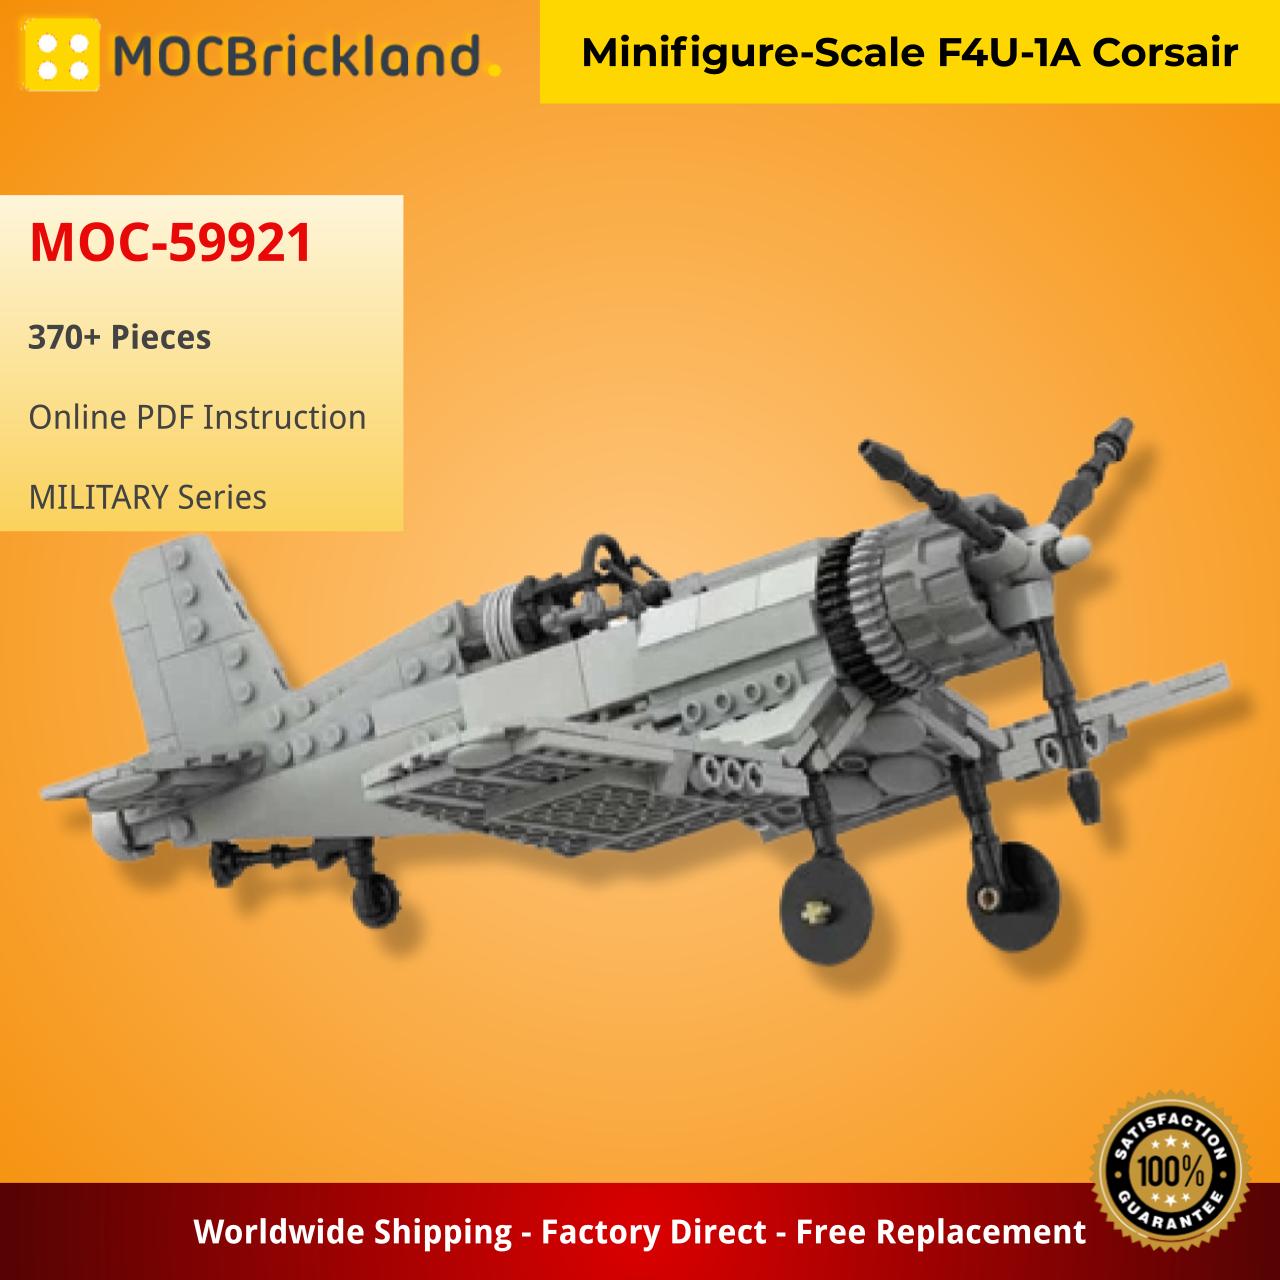 Minifigure-Scale F4U-1A Corsair MILITARY MOC-59921 by Rothana LEGO Engineering with 370 pieces